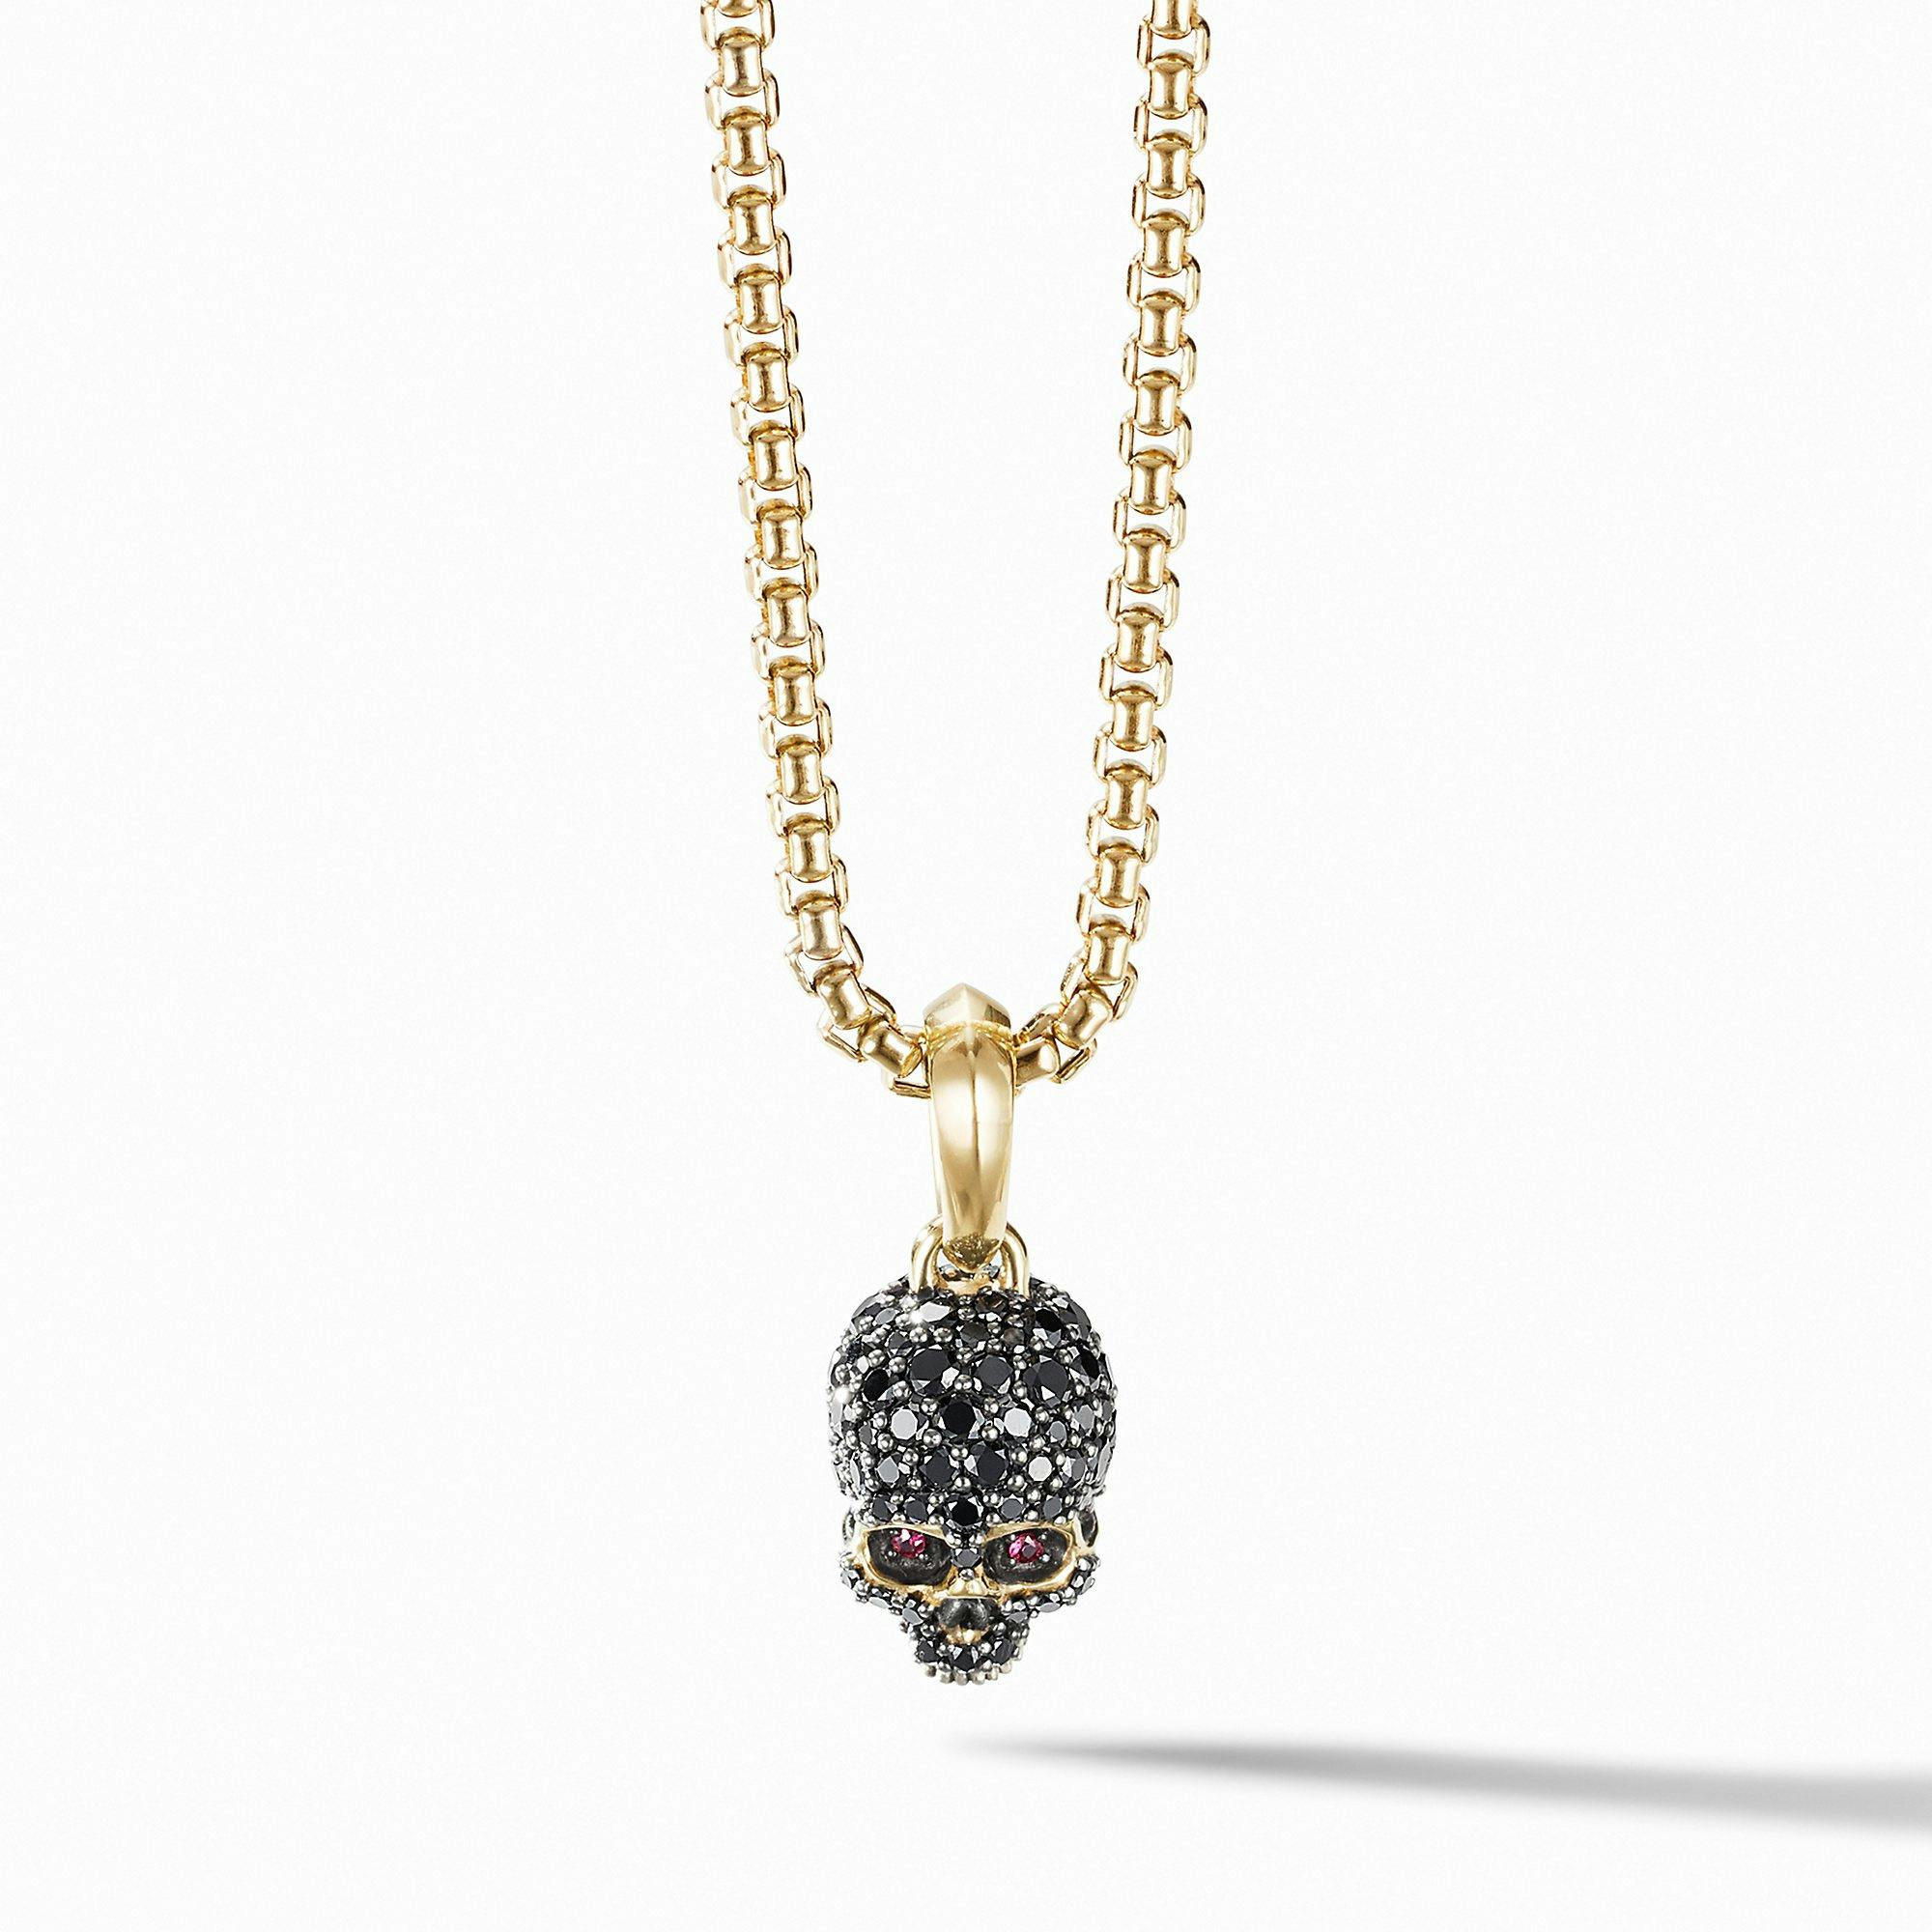 David Yurman Skull Amulet with Full Pave Black Diamonds, Rubies and 18K Yellow Gold | Front View